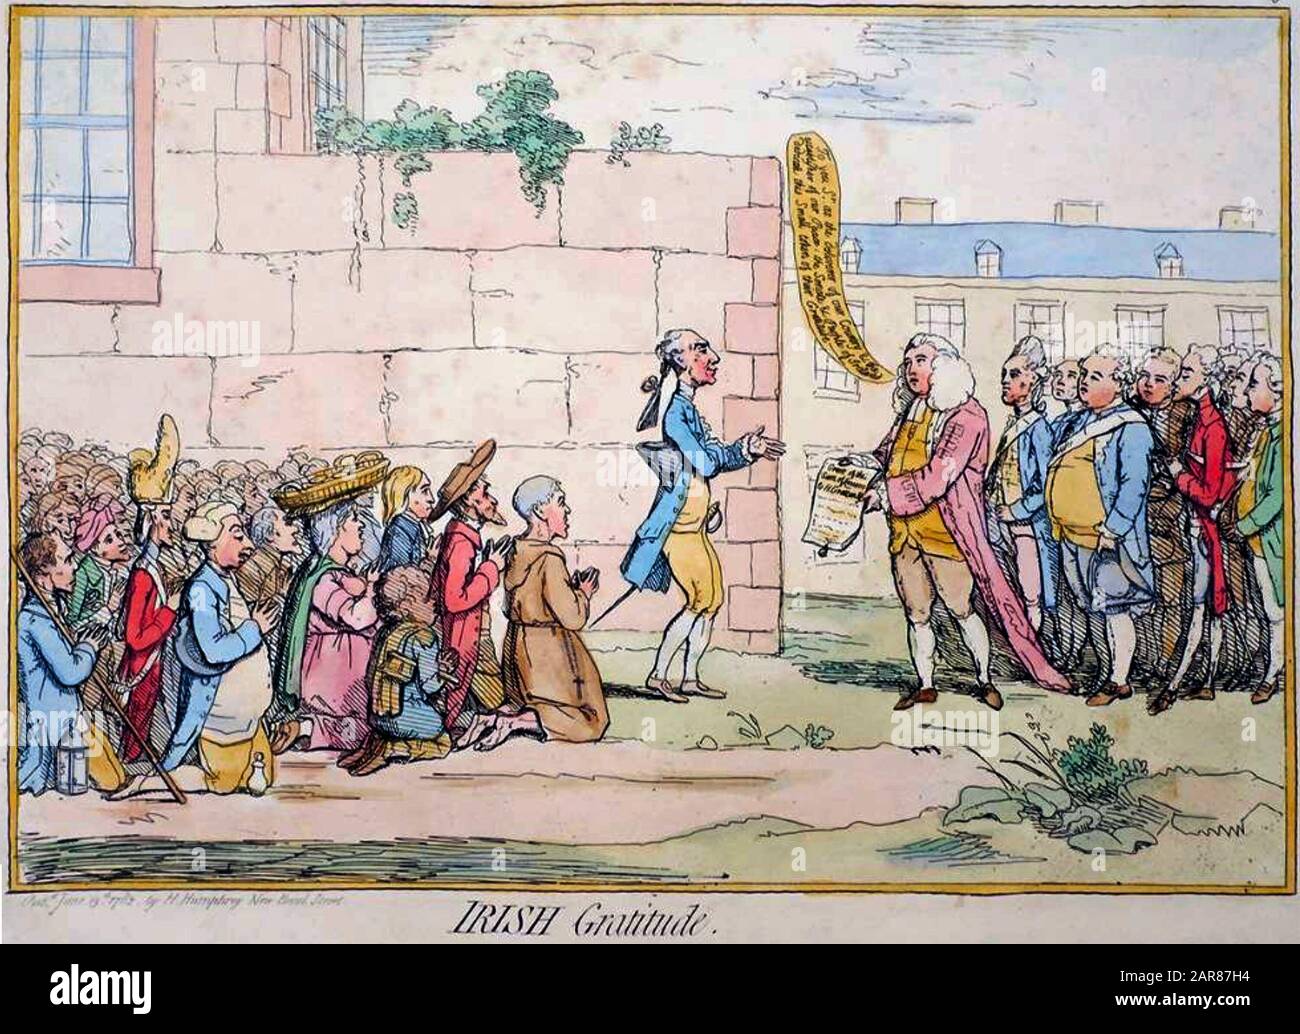 IRISH GRATITUDE by James Gillray, June 1782. Henry Grattan standing at left accepting the £100,000 (later reduced to £50,000) voted to him in the Irish Parliament for his services of securing Irish independence. Stock Photo